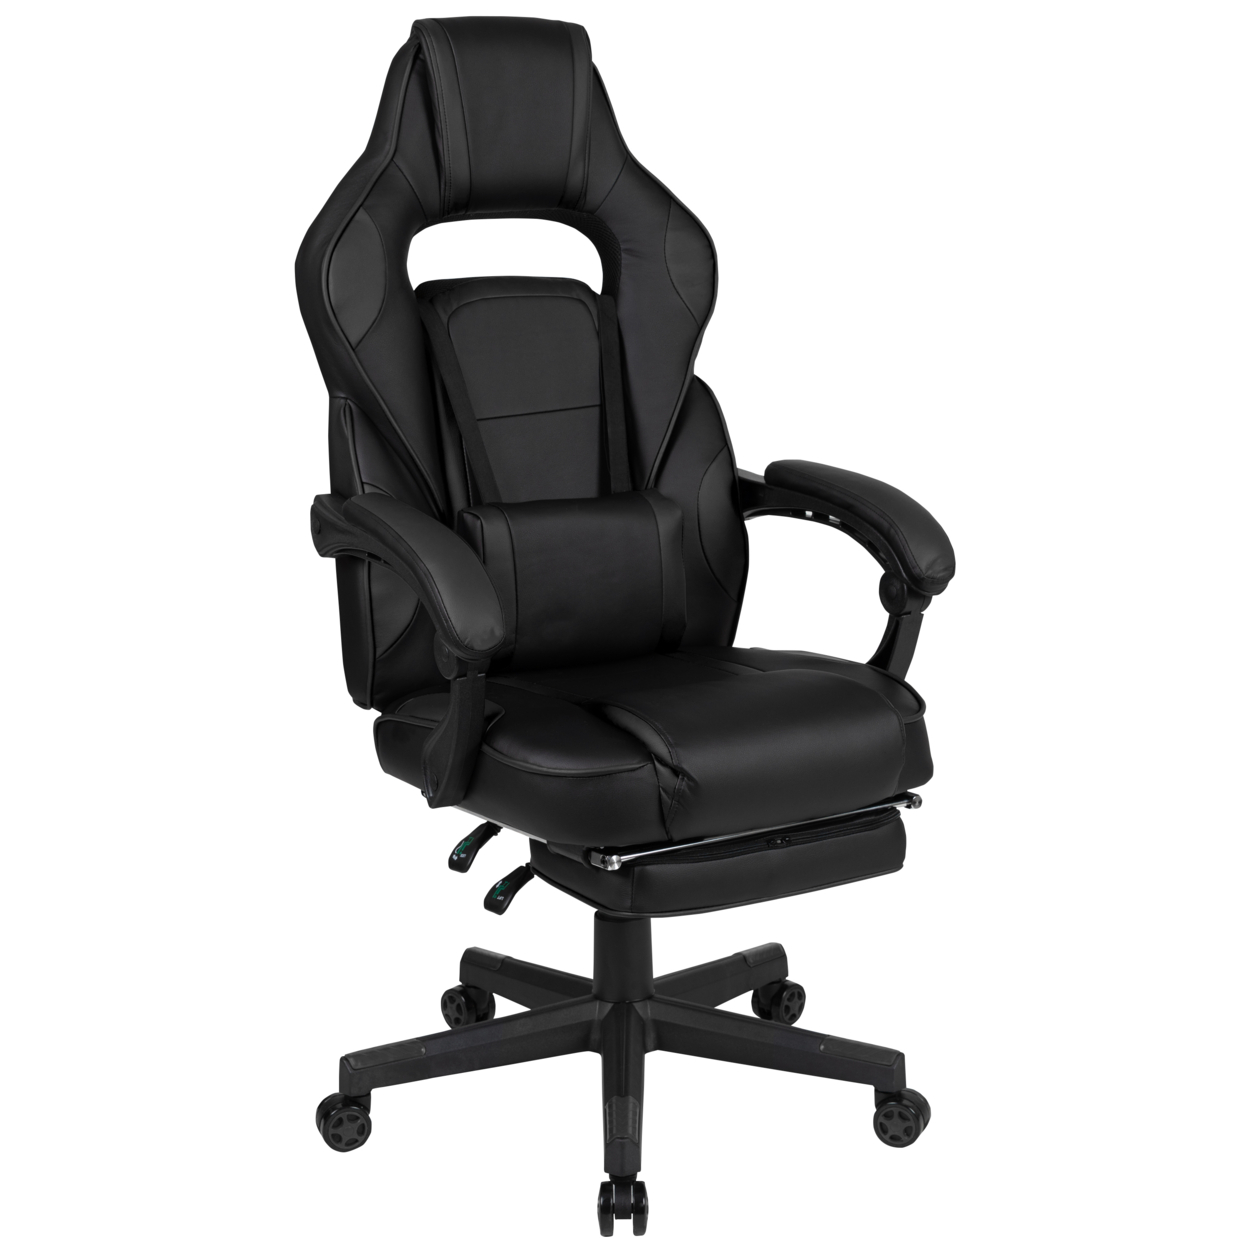 X40 Gaming Chair Racing Ergonomic Computer Chair With Fully Reclining Back And Arms, Slide-Out Footrest, Massaging Lumbar - Black